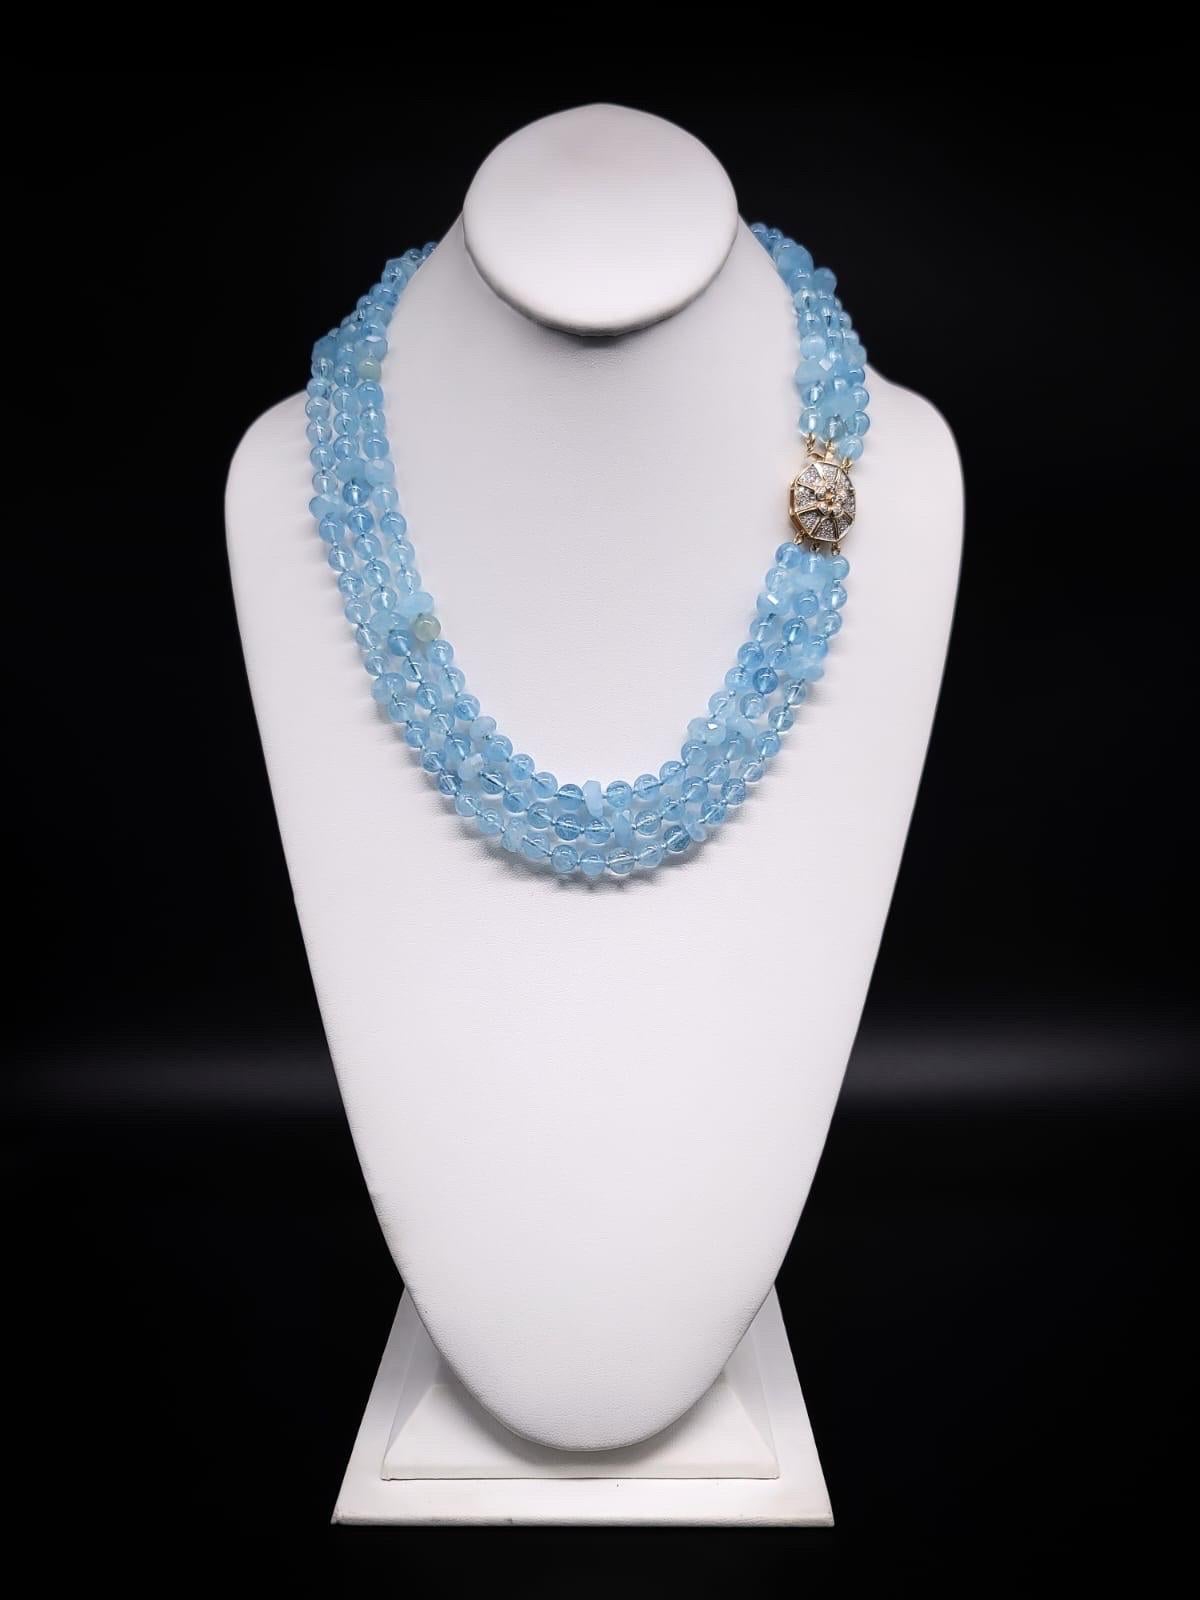 One-of-a-Kind

Romantic Aquamarine  8m.m, 3-strand necklace with a Diamond and 14K gold clasp. The soft blue Aquamarine polished beads are accented with rough-cut aquamarine roundels in the same shade of blue. The irresistible pastel strands are